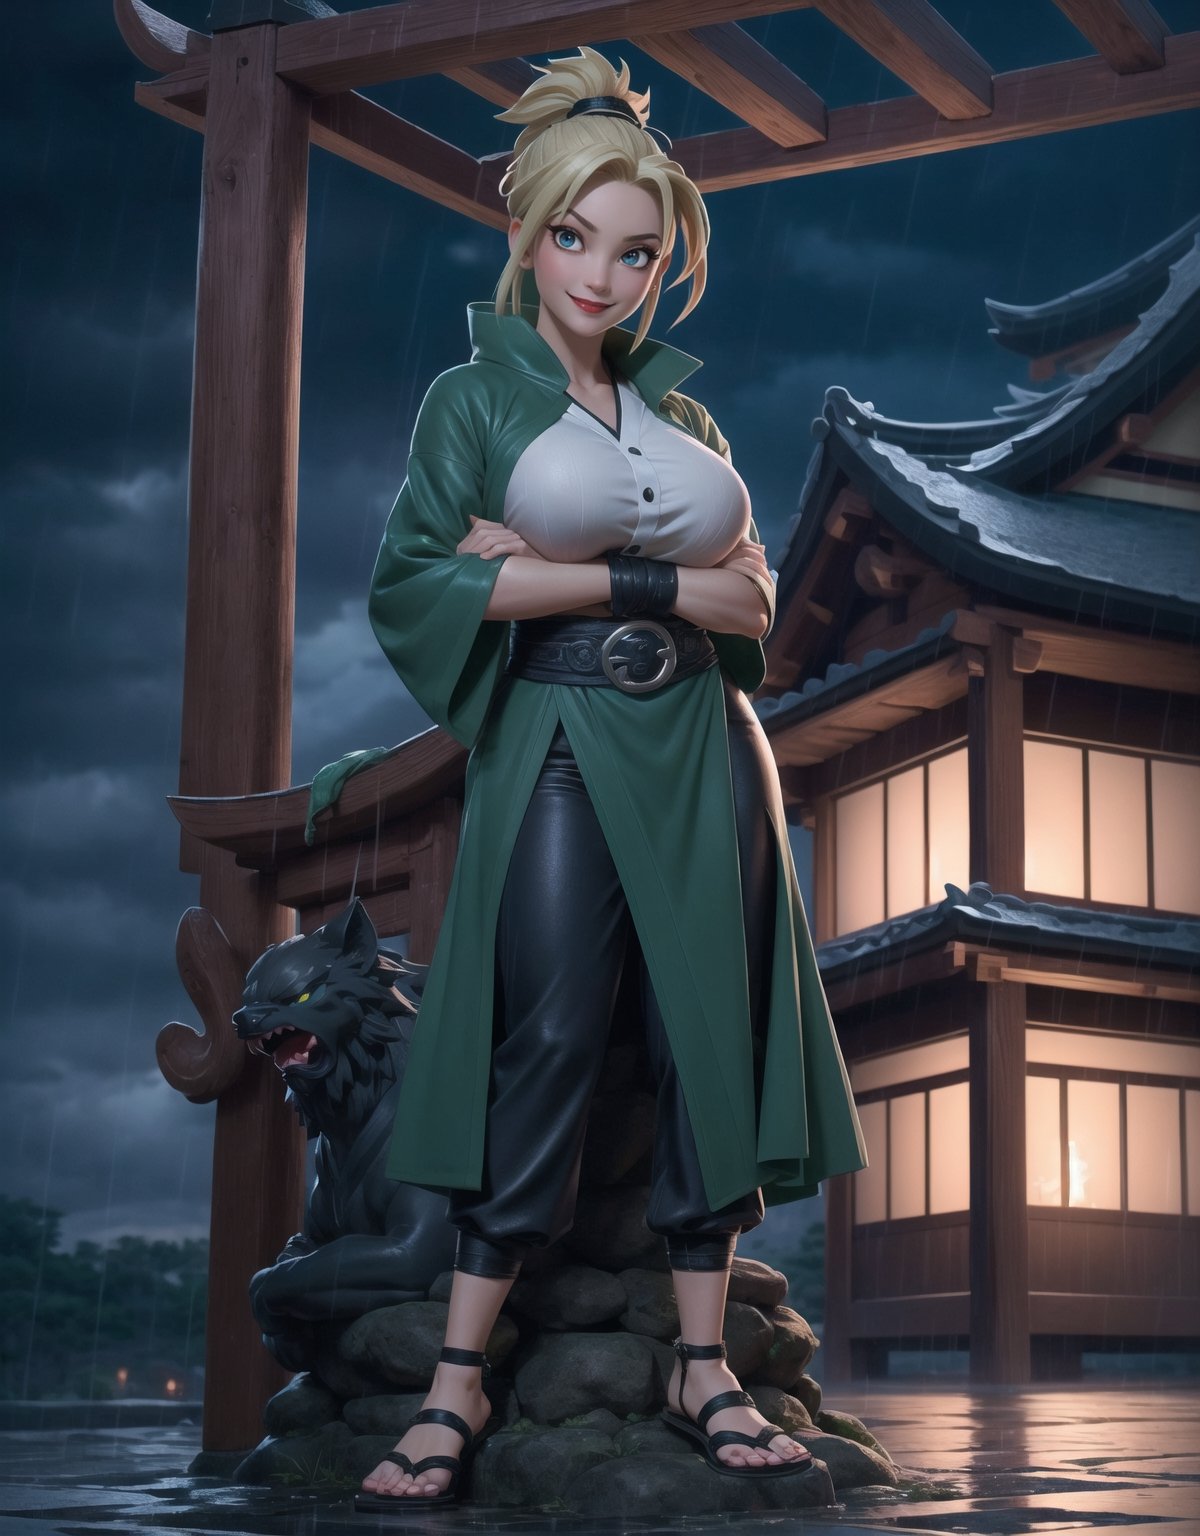 Masterpiece in UHD resolution, with sharp details and a style inspired by (Naruto Shippuden), blending into the nighttime setting of a ninja temple during a heavy rain. | ((Tsunade)), a 30-year-old woman, wears a tight outfit consisting of a green coat, a collarless white shirt, dark blue trousers, and black leather sandals. Her (gigantic_breasts)) are emphasized by the snug attire. Her blonde hair, with a voluminous fringe over the right eye and a ponytail, accentuates her presence. Tsunade looks directly at the viewer with a sincere gaze and a big smile. | The nighttime ninja temple is enriched with elements of black marble, altars with ninja inscriptions, pillars, and a statue of an ancient hokage. Candles affixed to the walls illuminate the space as heavy rain adds a dramatic atmosphere. The three-dimensional composition highlights Tsunade in the foreground, interacting with the temple structure. | Cinematic lighting accentuates Tsunade's figure, while rain effects and glows on surfaces add dynamism to the scene. | An incredible woman, Tsunade, in a rainy ninja temple at night, with her gigantic_breasts. | {The camera is positioned very close to her, revealing her entire body as she adopts a sensual_pose, interacting with and leaning on a structure in the scene in an exciting way} | ((perfect_pose)), She is adopting a ((sensual_pose as interacts, boldly leaning on a structure, leaning back in an exciting way):1.3), ((full body)), (perfect_fingers:1.0), (perfect_legs:1.0), More_Detail, realhands